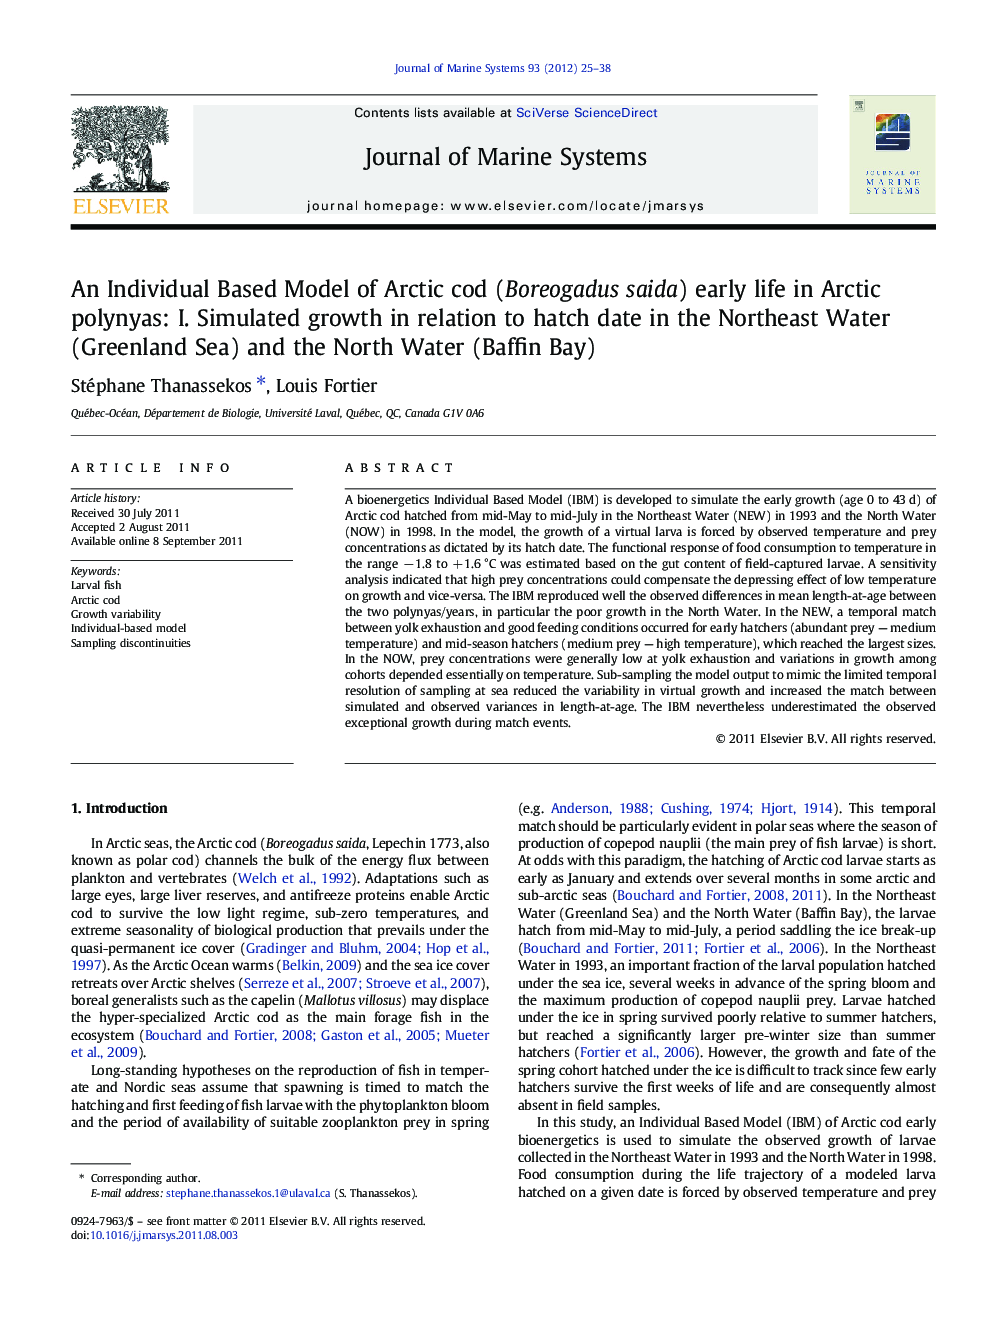 An Individual Based Model of Arctic cod (Boreogadus saida) early life in Arctic polynyas: I. Simulated growth in relation to hatch date in the Northeast Water (Greenland Sea) and the North Water (Baffin Bay)